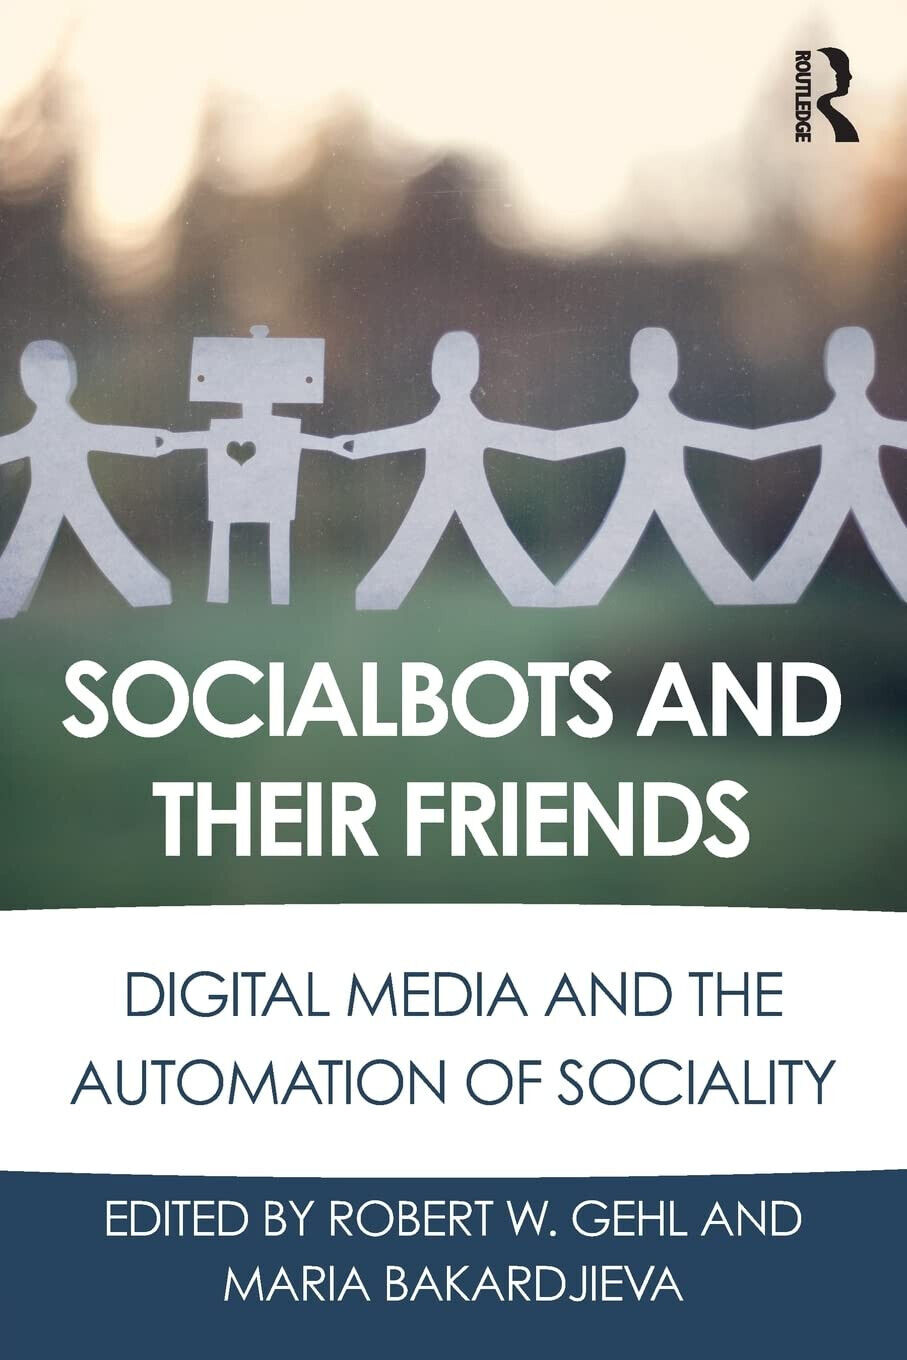 Socialbots and Their Friends - Robert W. Gehl - Routledge, 2016 libro usato